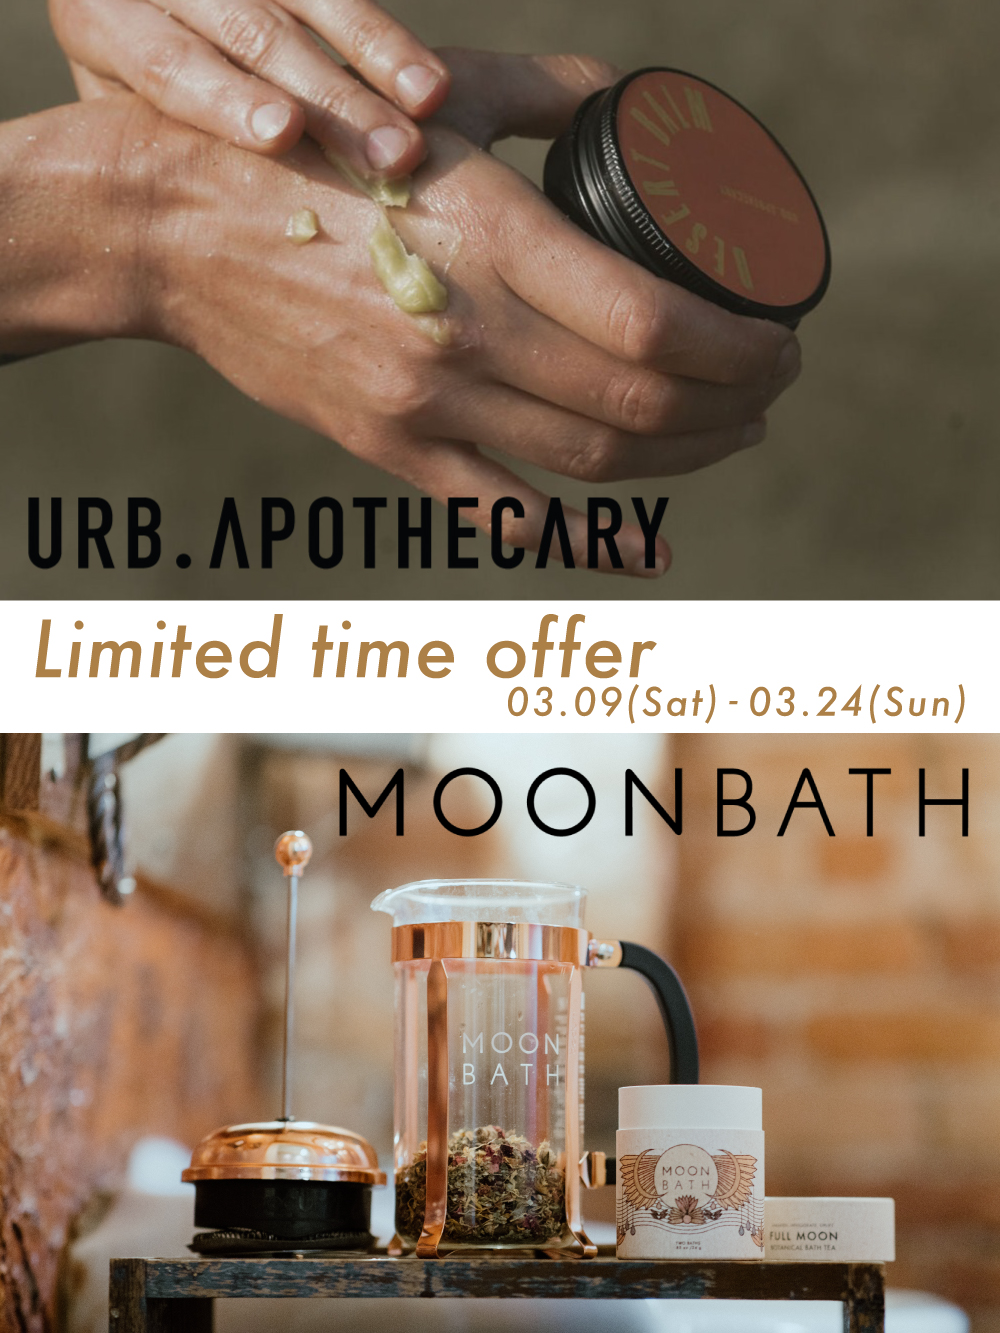 Limited time offer「Moon Bath / URB.APOTHECARY」